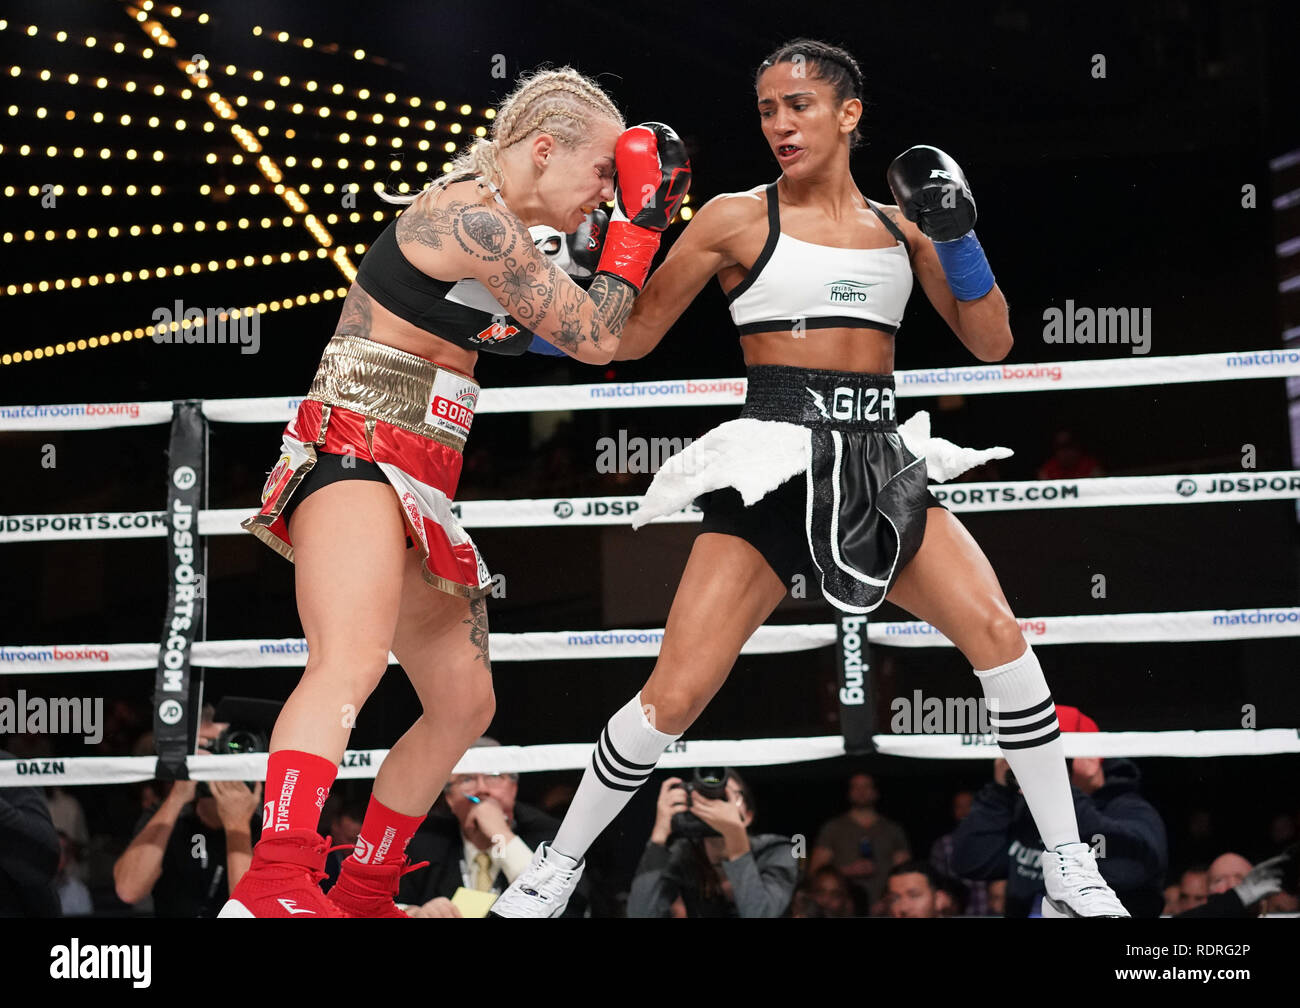 New York, New York, USA. 18th Jan, 2019. AMANDA SERRANO (black and white trunks) battles EVA VORABERGER for the vacant World Boxing Organization World Female Super Flyweight title at the Hulu Theater in Madison Square Garden in New York, New York. Credit: Joel Plummer/ZUMA Wire/Alamy Live News Stock Photo